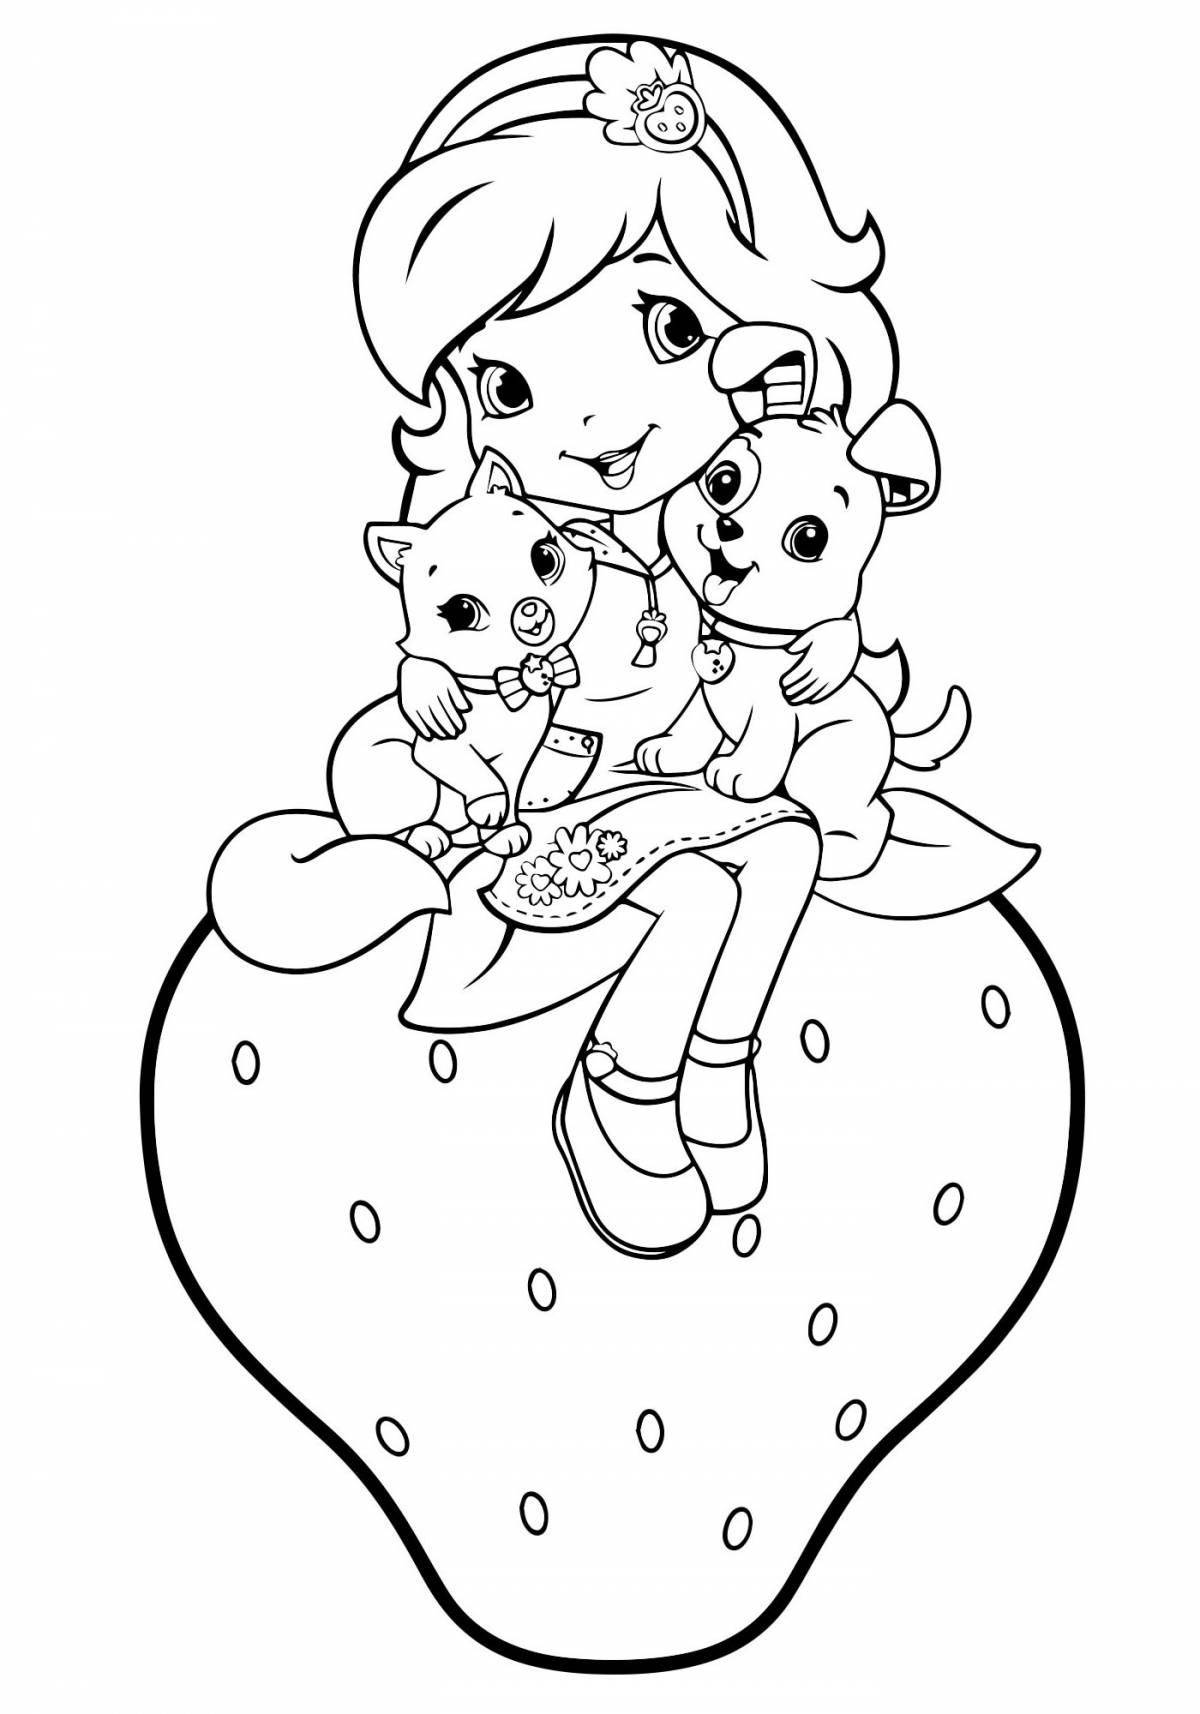 Violent strawberry girl coloring book